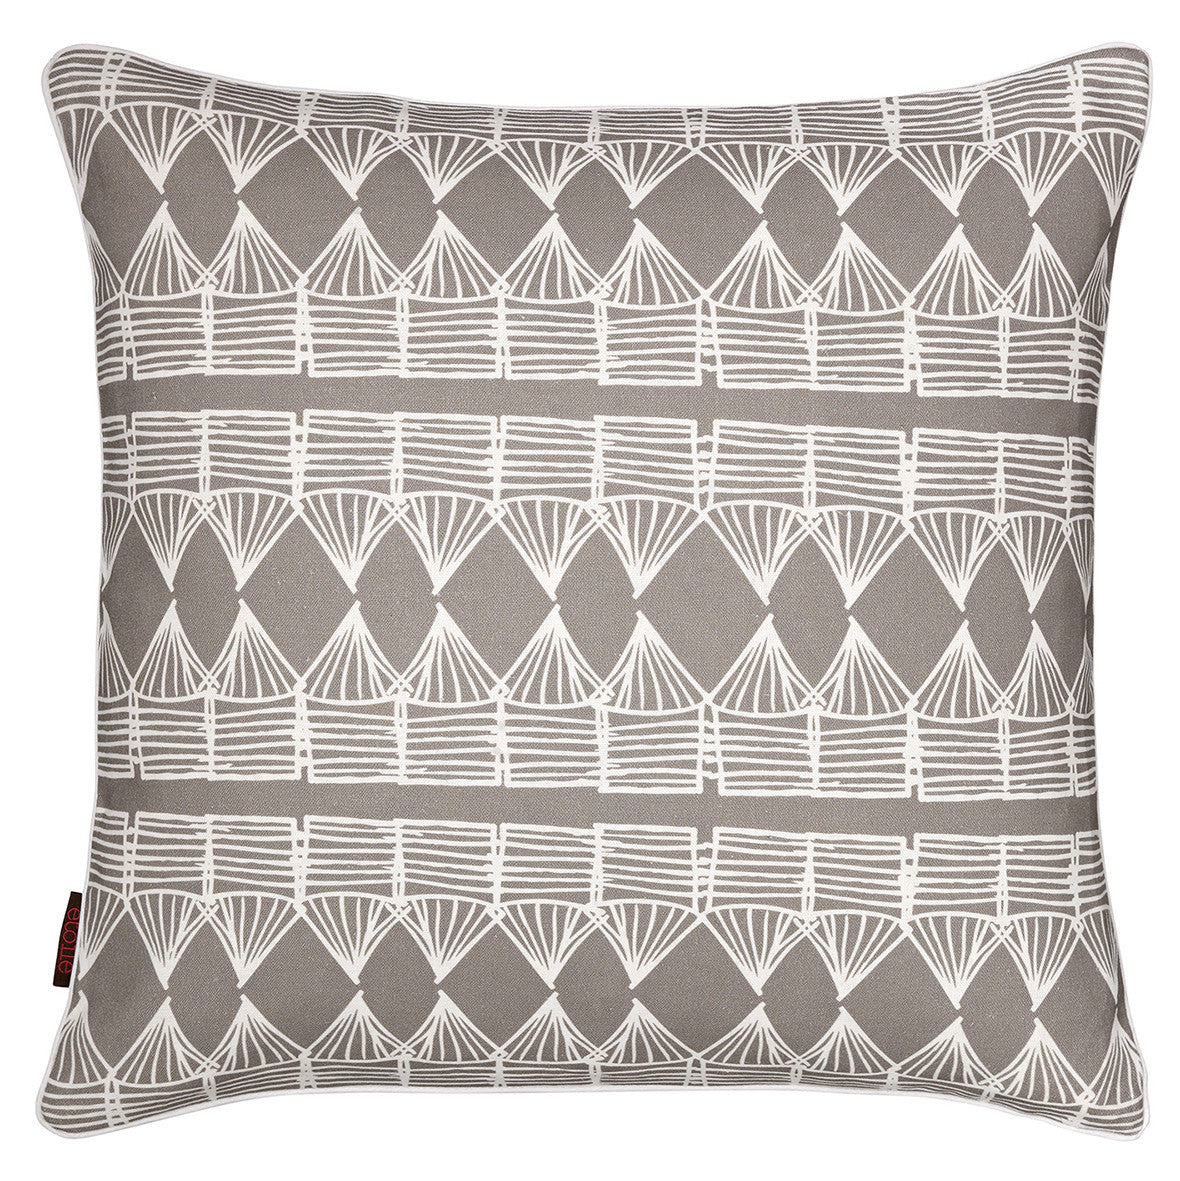 Tiki Huts Pattern Linen Throw Pillow Cushion in Light Dove Grey 45x45cm Ships from Canada worldwide including the USA